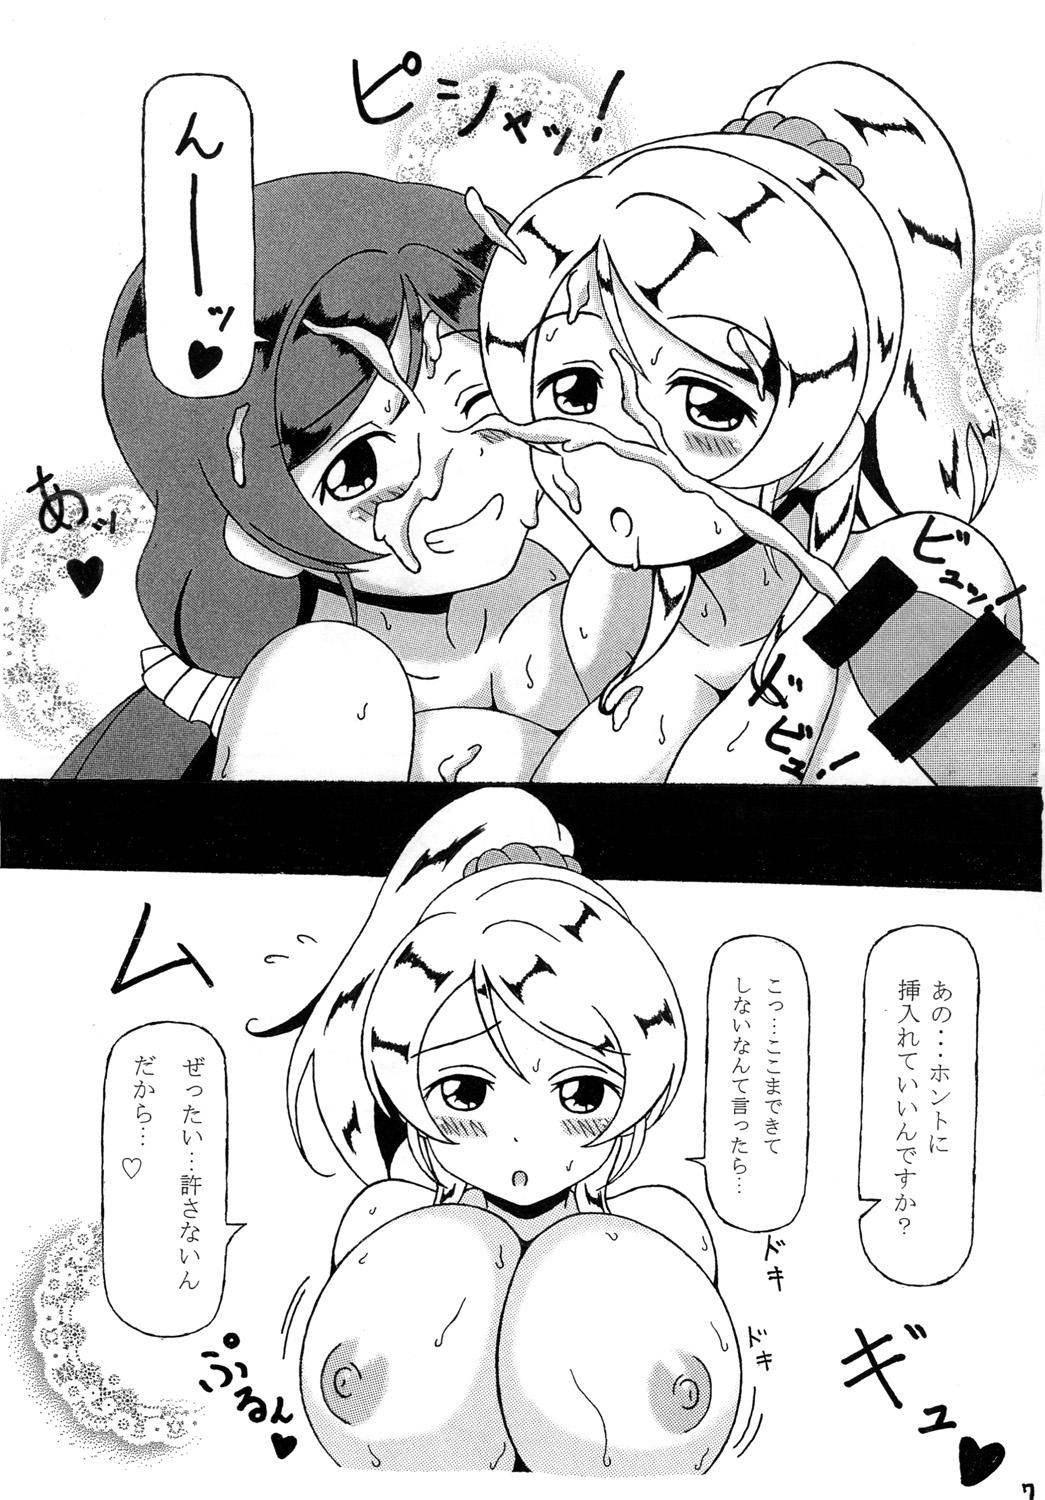 Russian Nozomi o Kanaete - Love live Party - Page 9